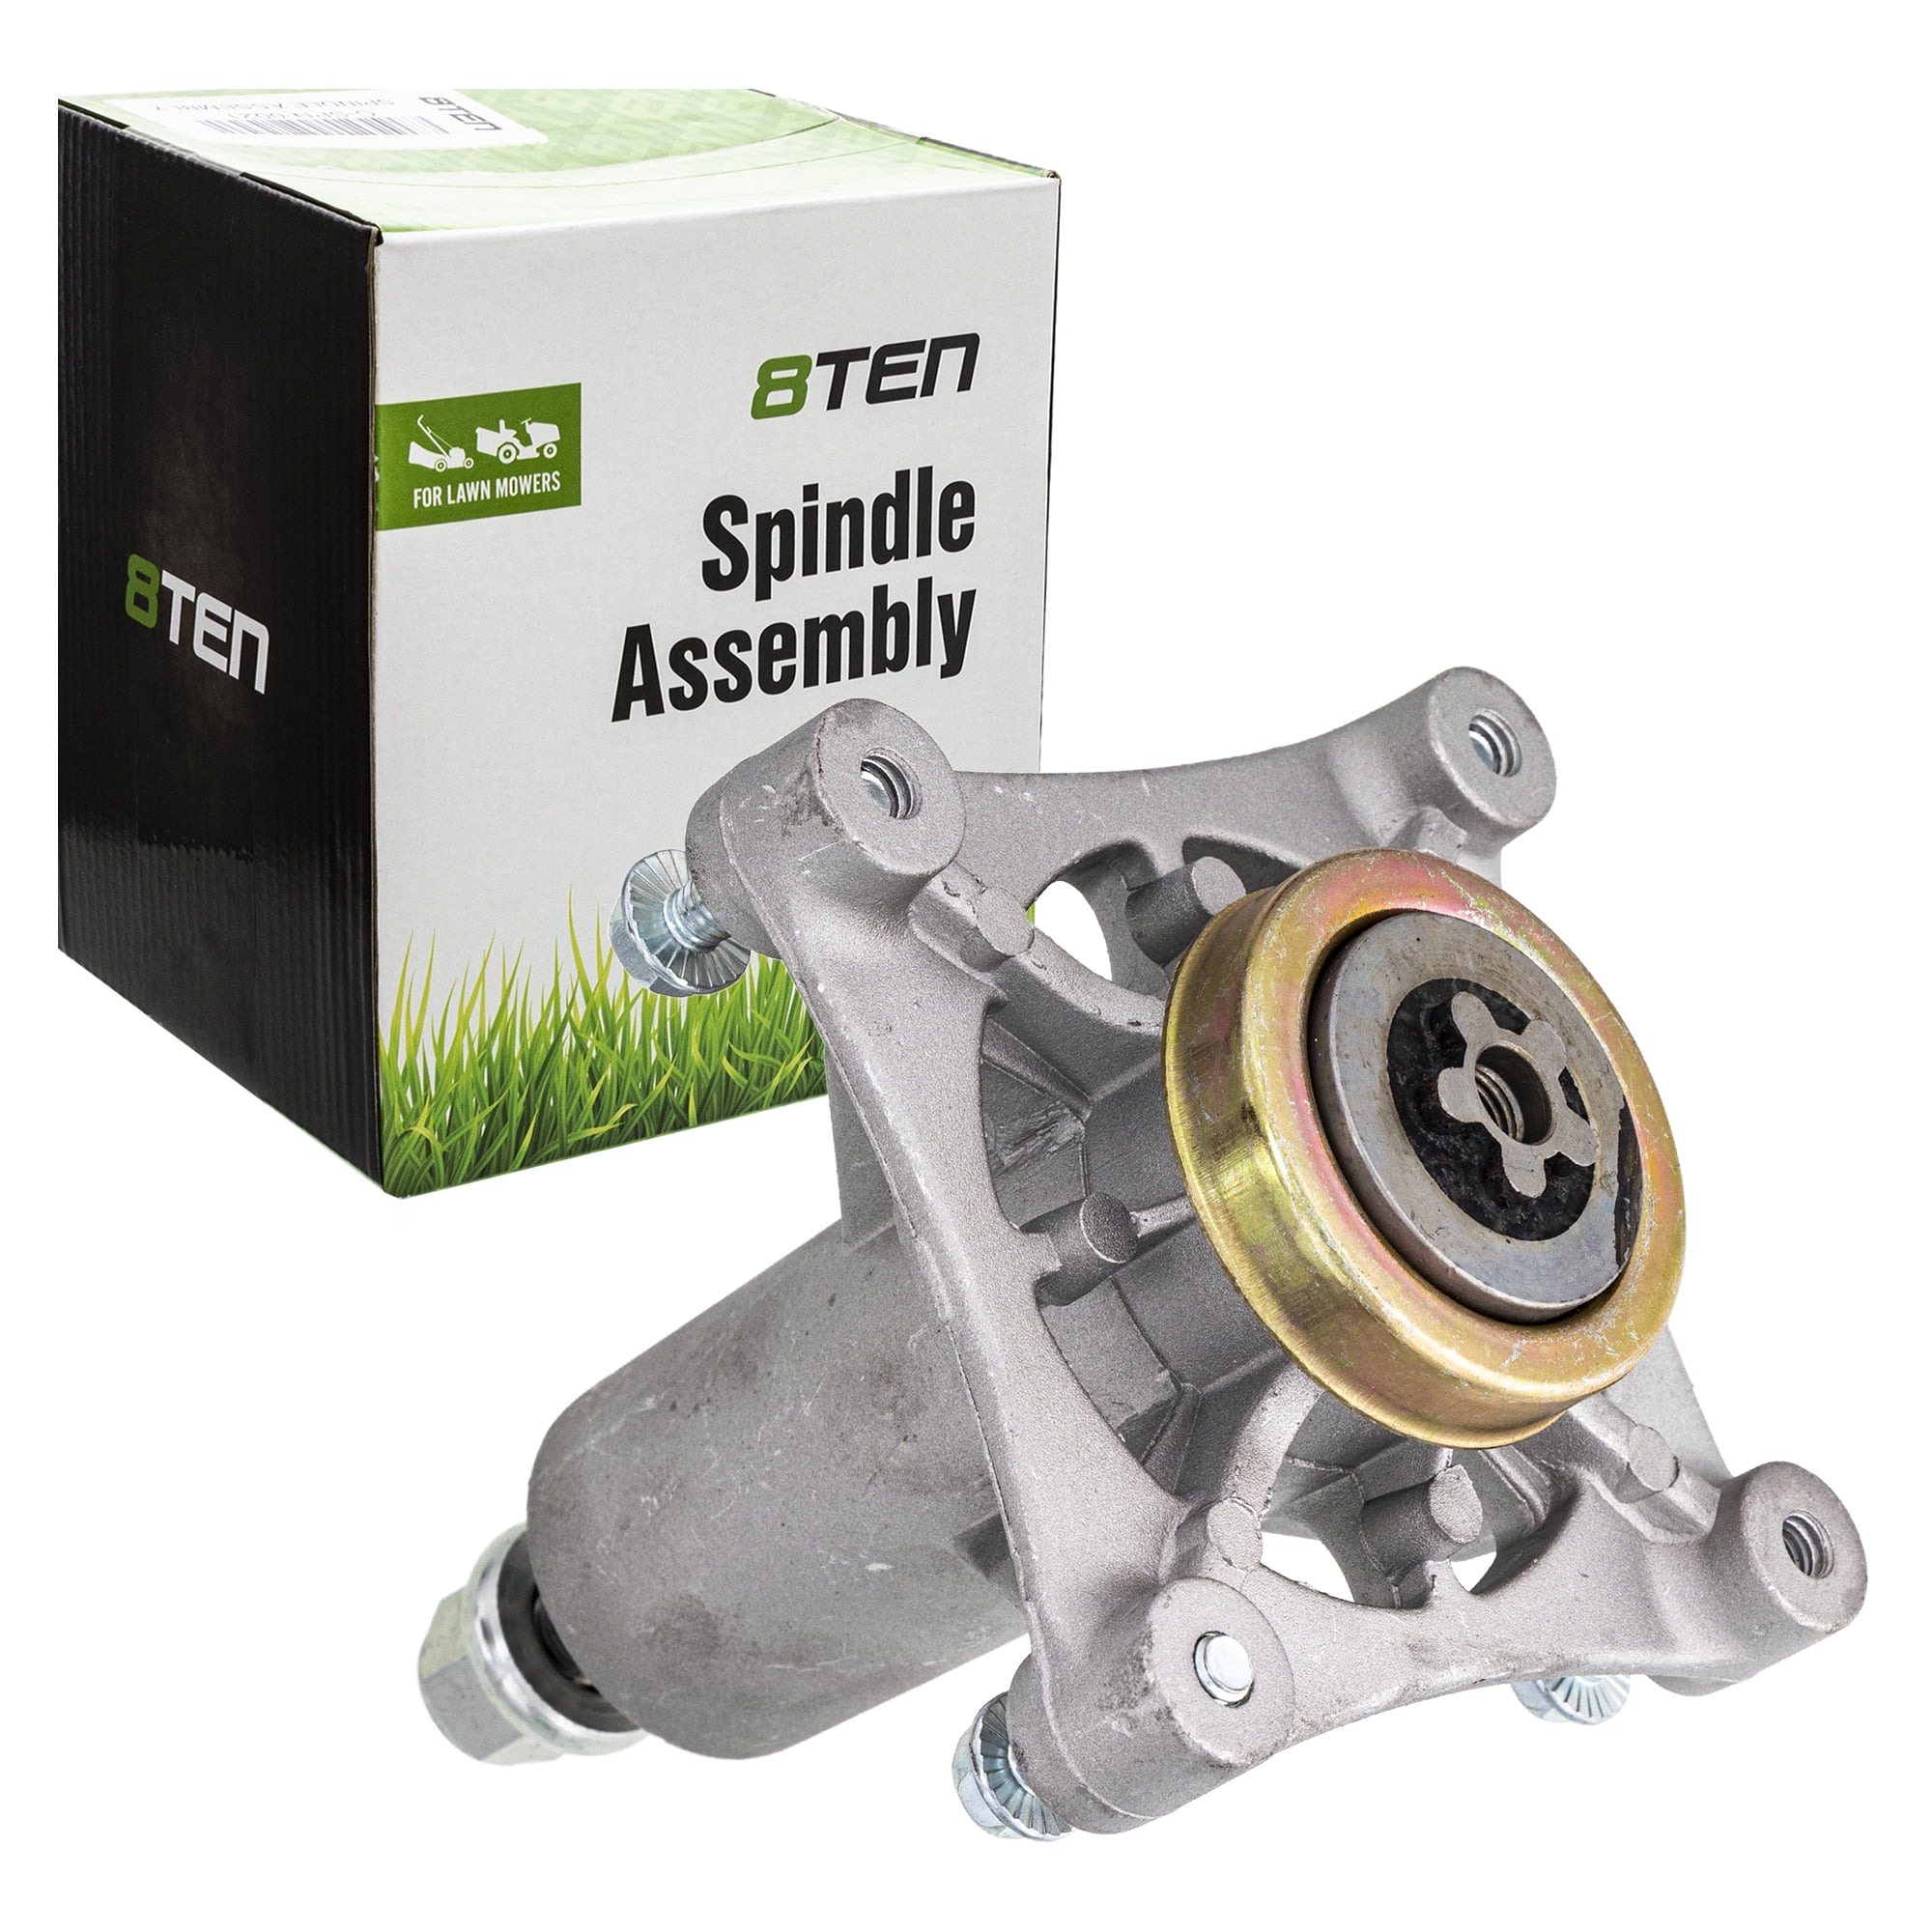 532130794 Details about   Heavy Duty Spindle Assembly for Craftsman Husqvarna 130794 Poulan